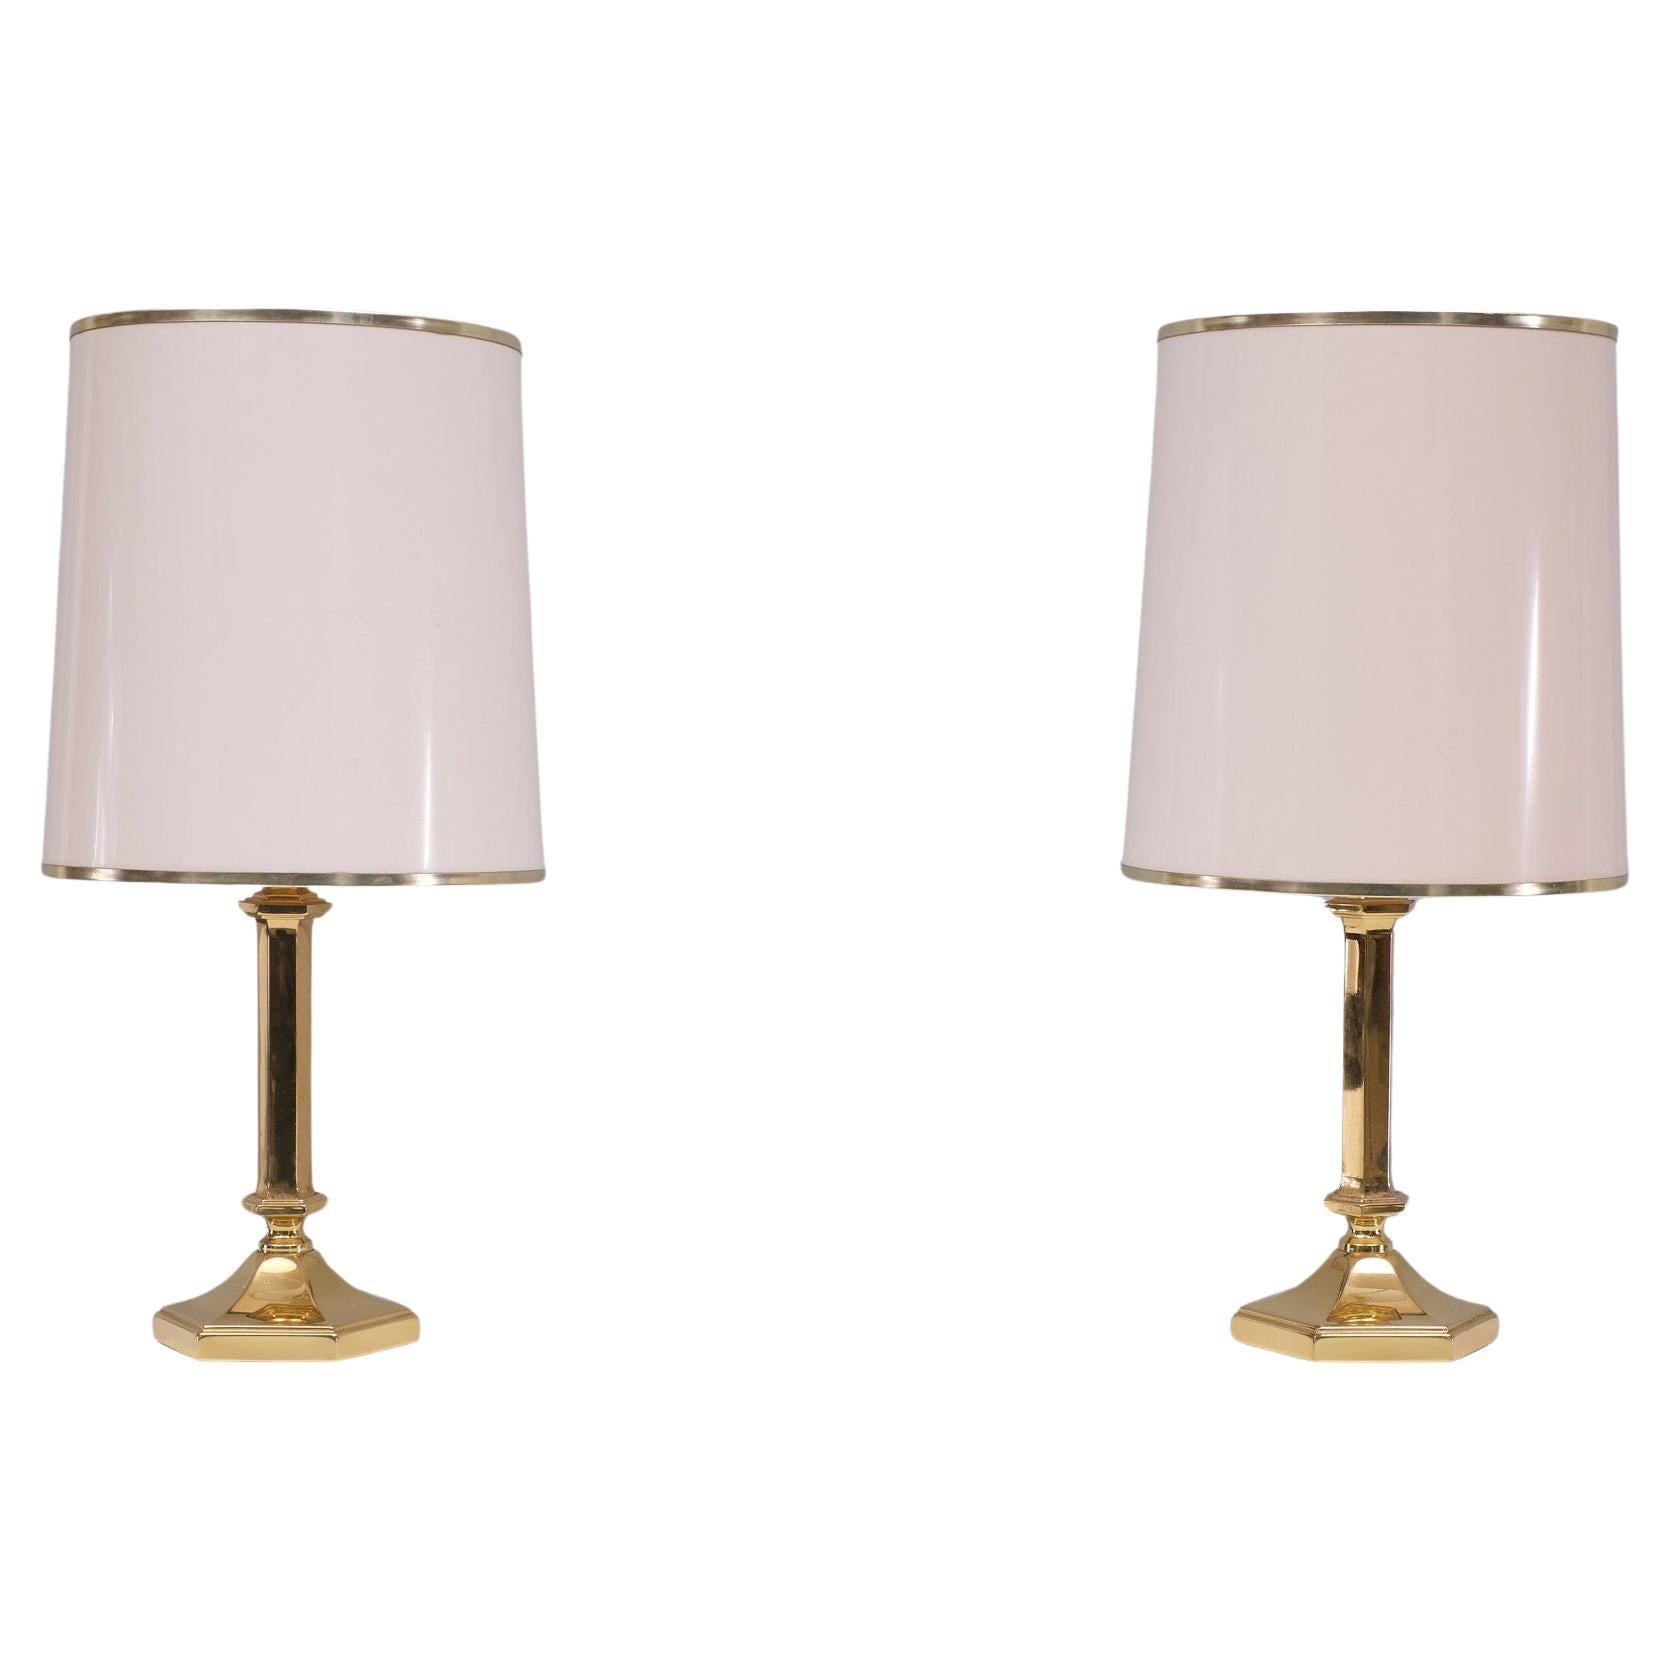 Herda Hollywood Regency Table Lamps  1970 Holland  For Sale